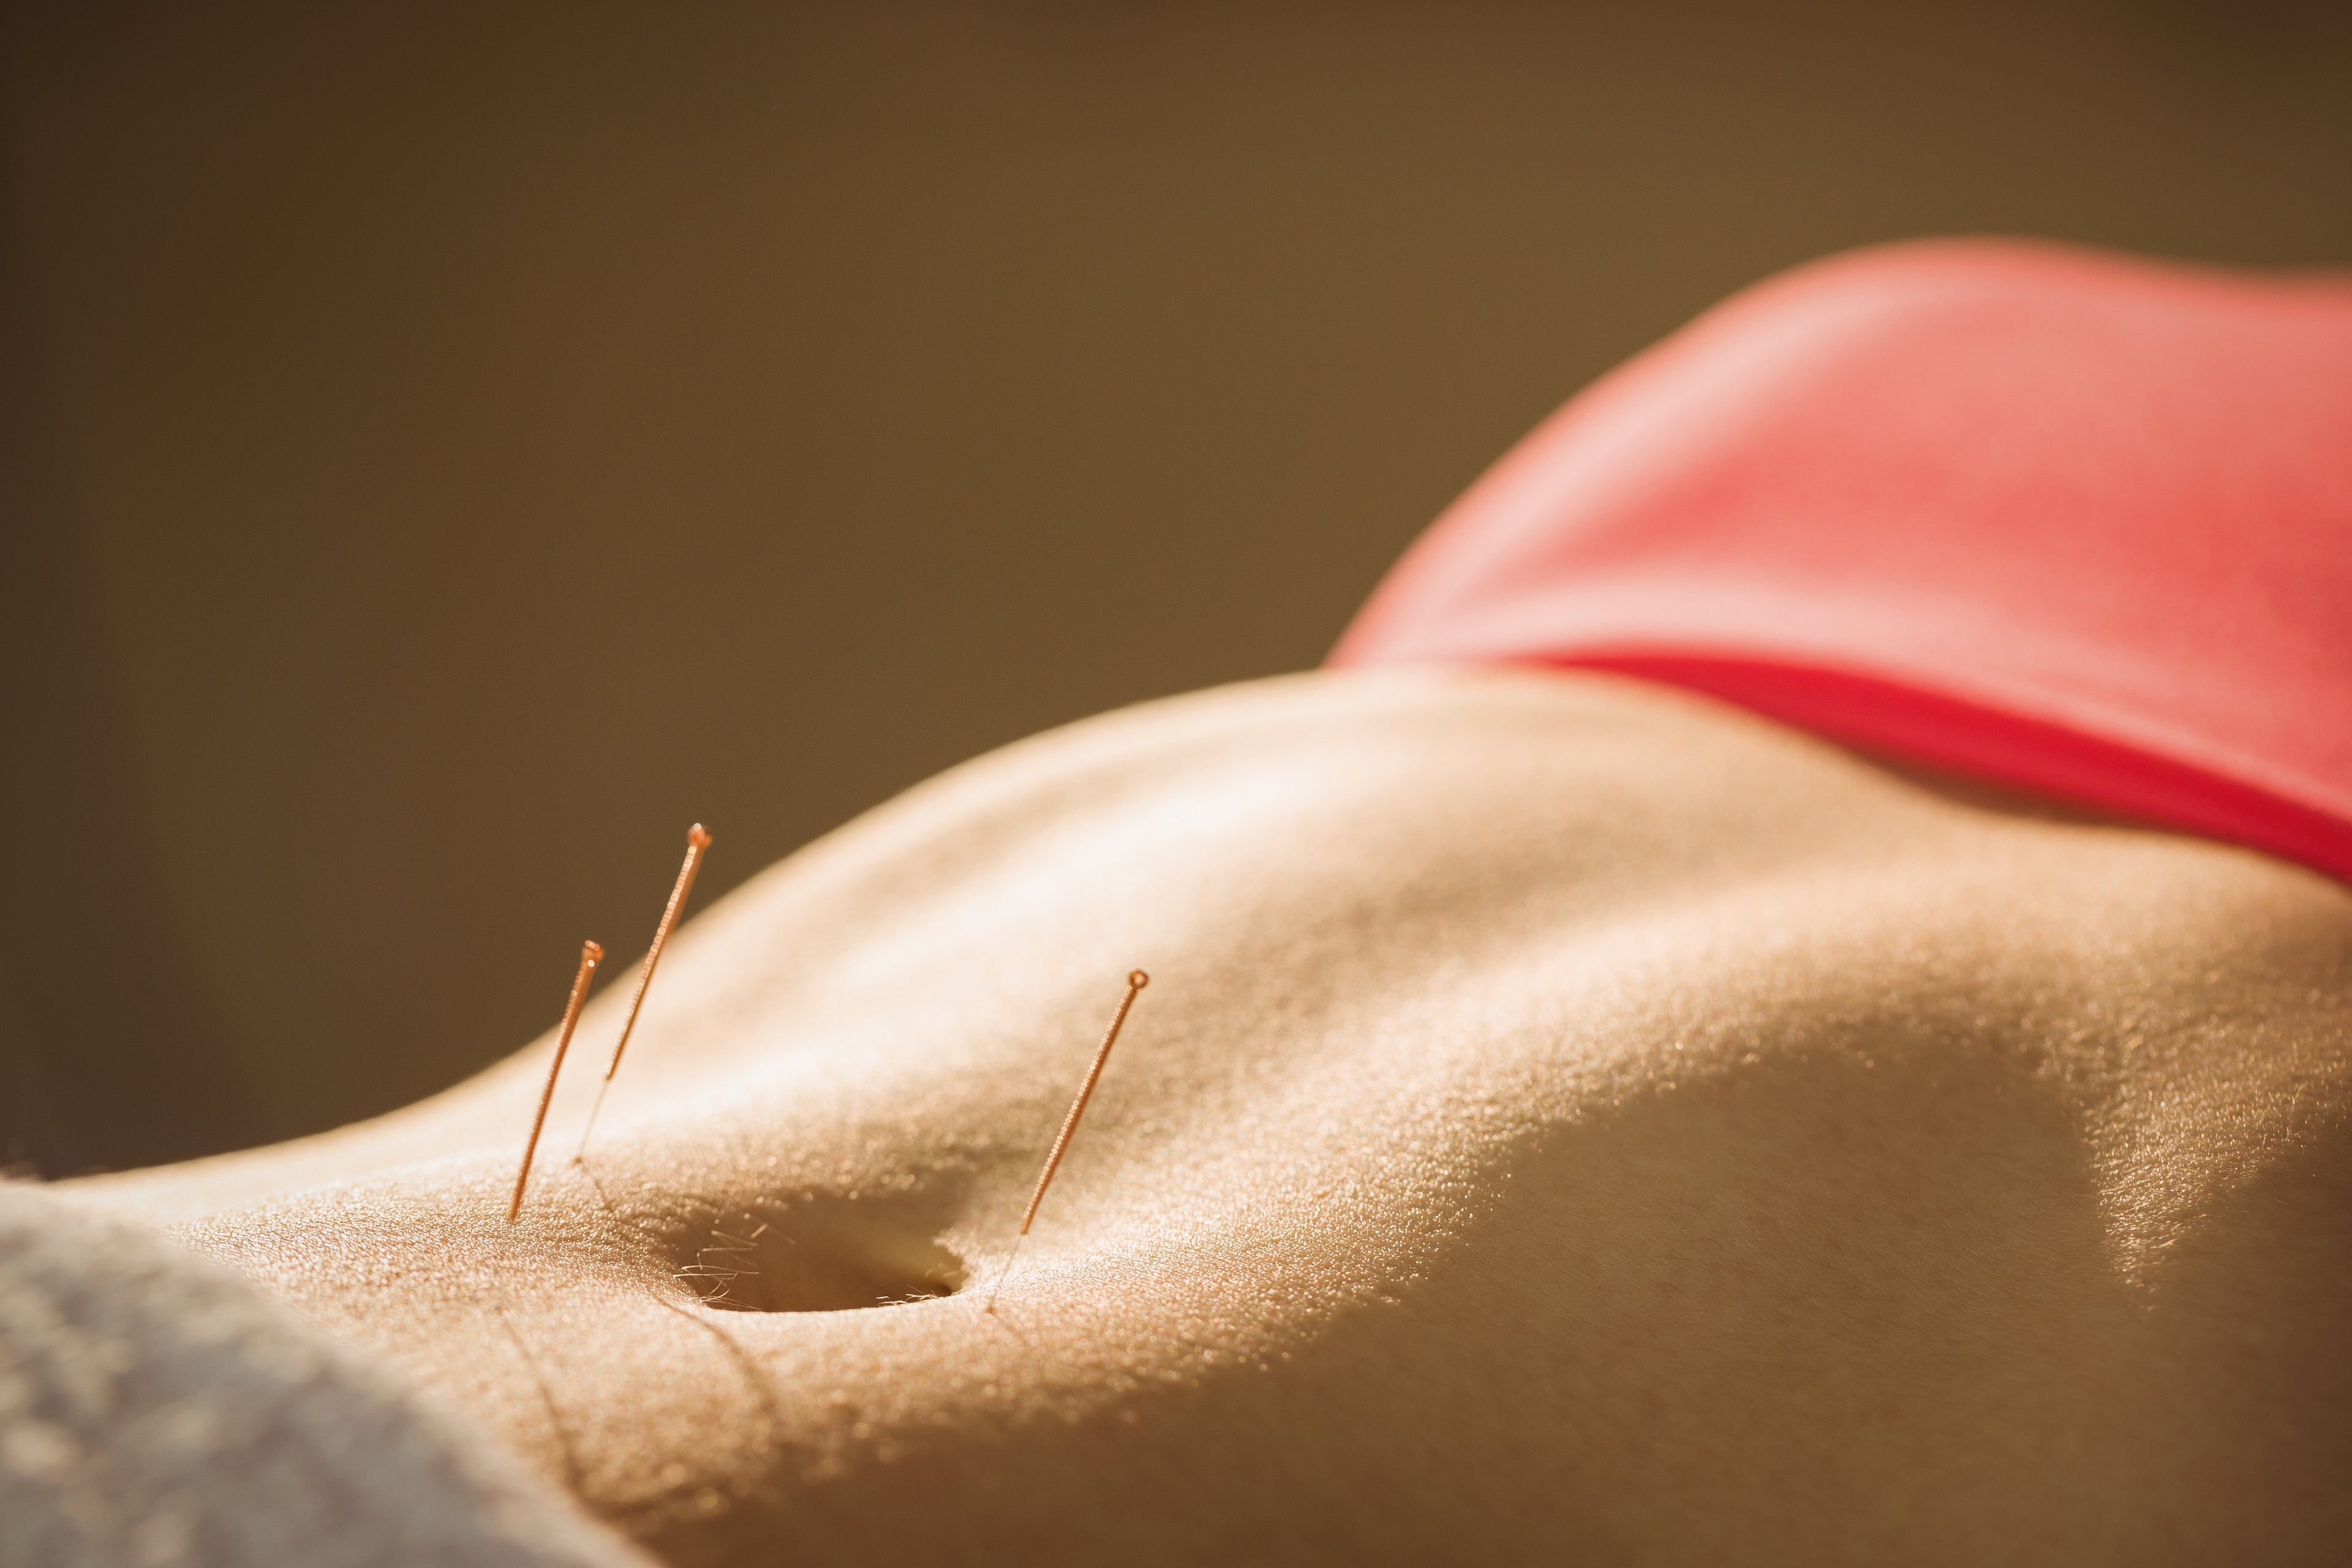 buy acupuncture needles for pain and sleep at lierre.ca